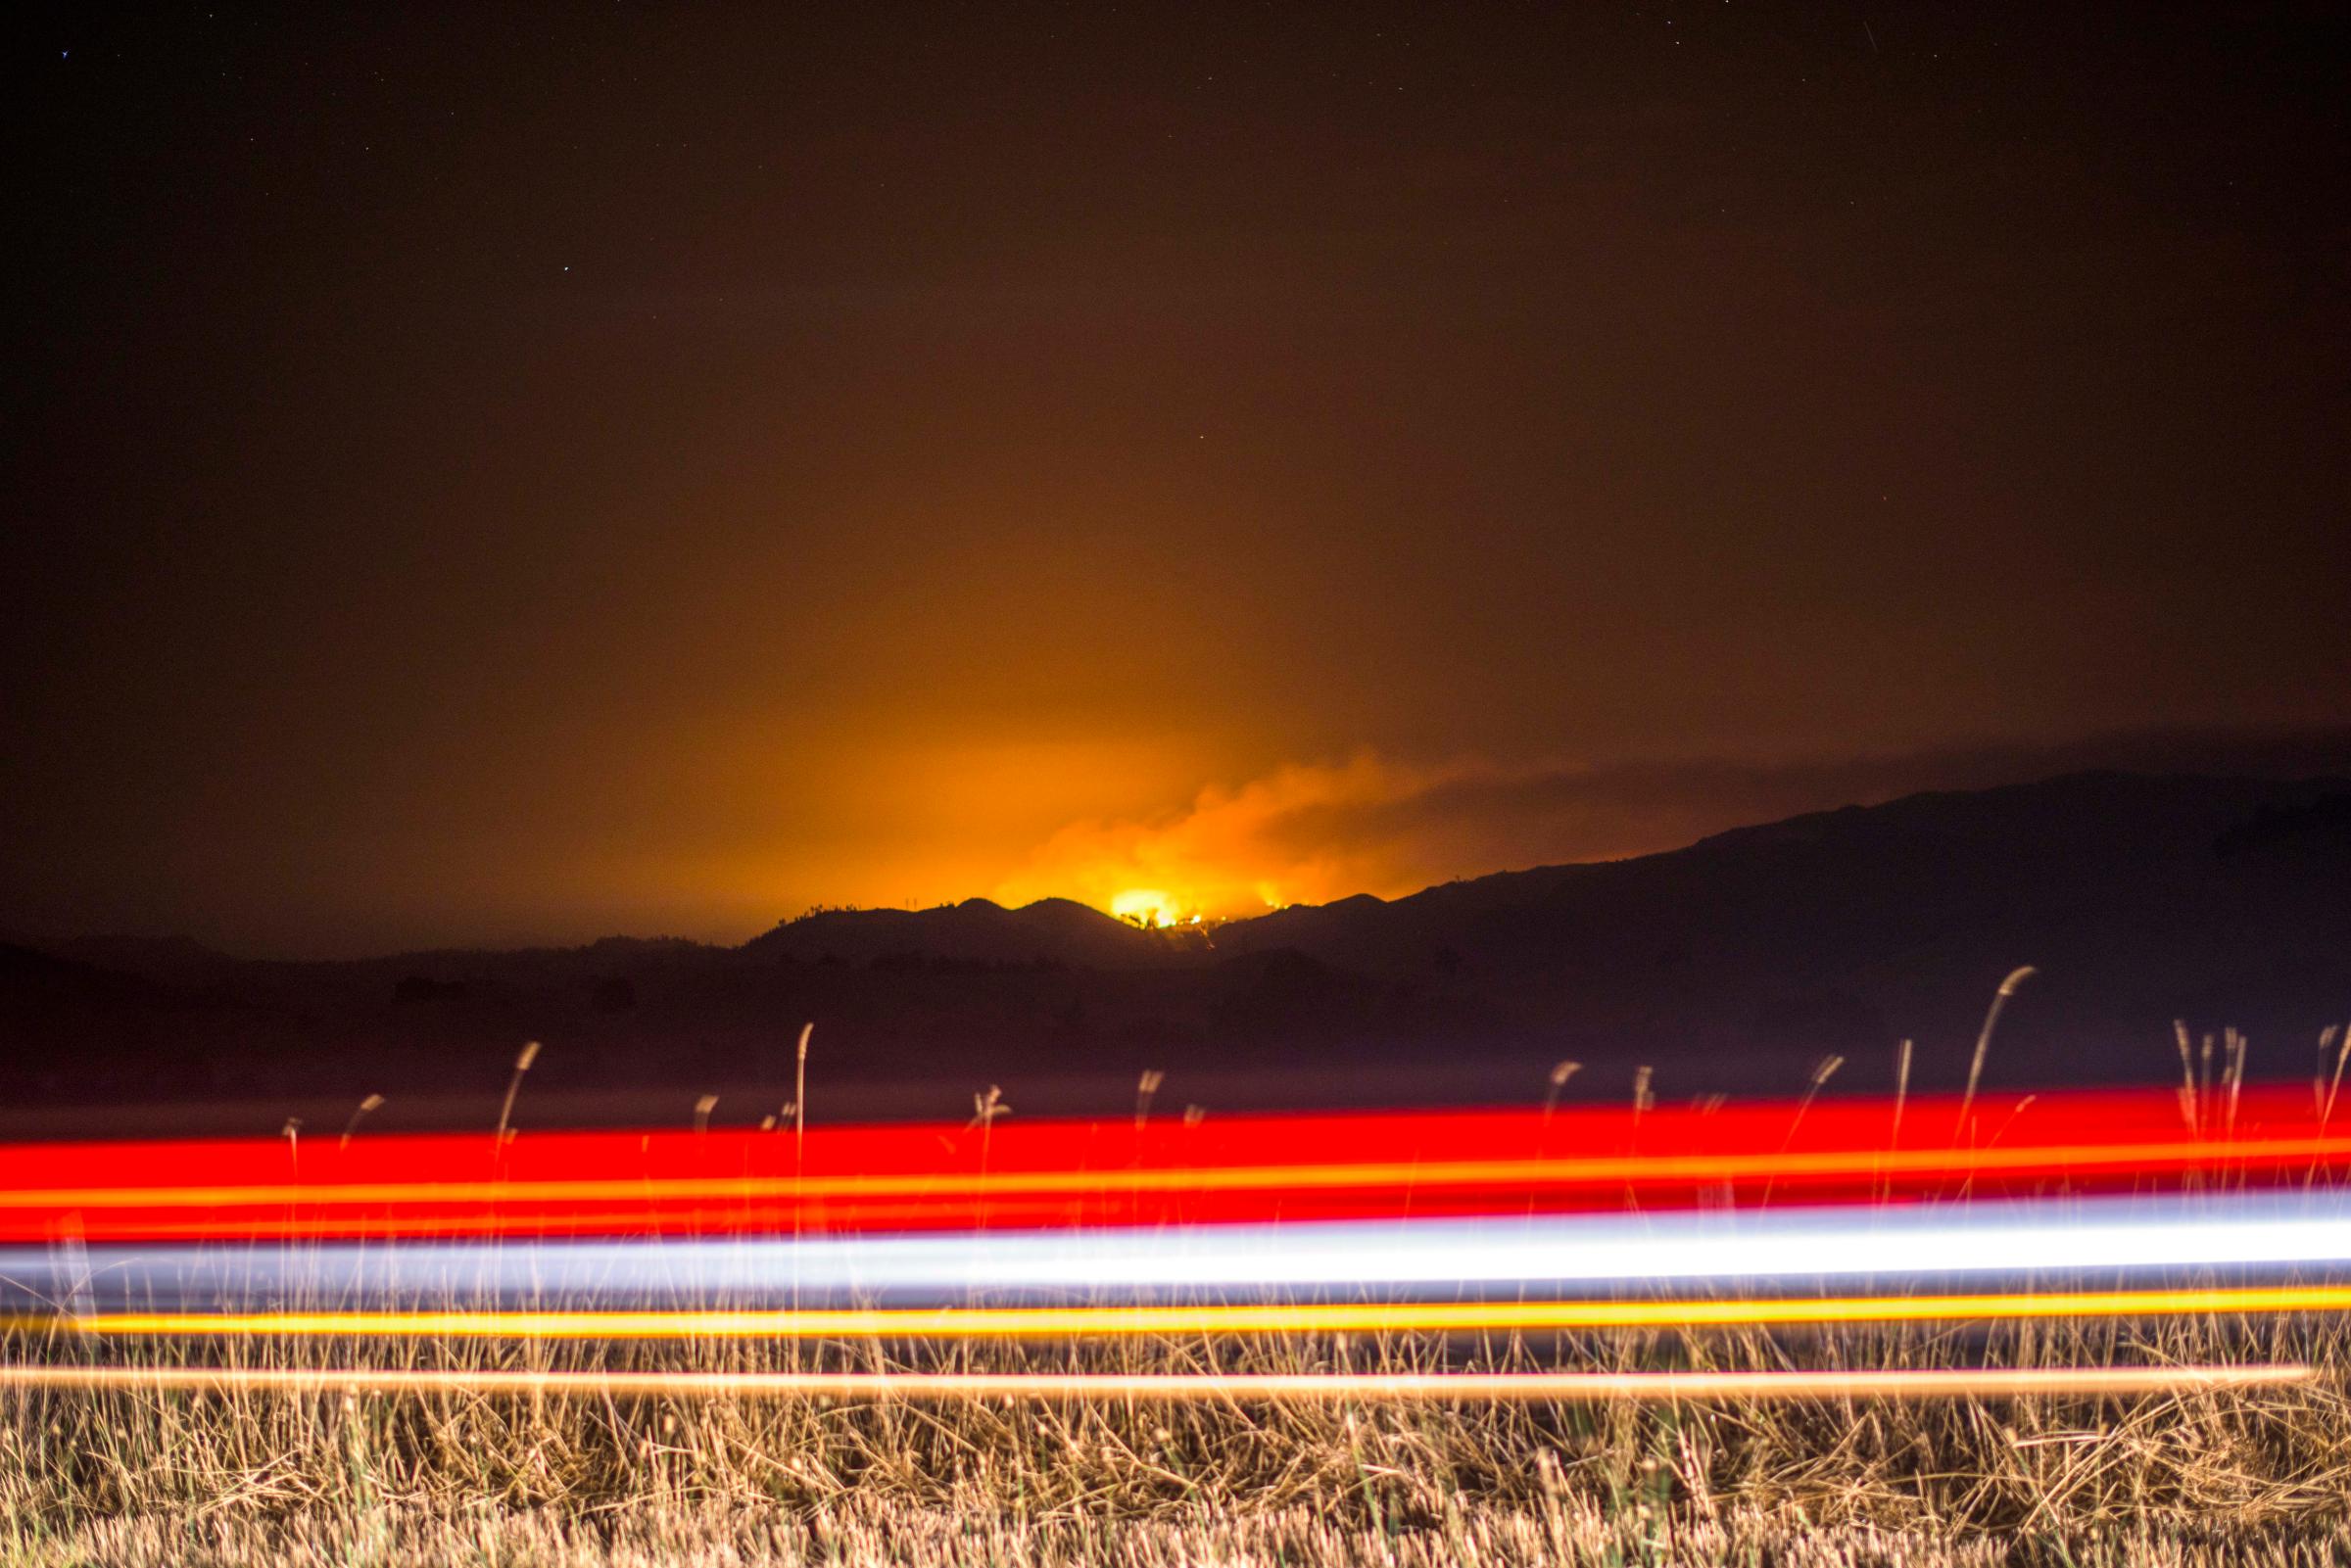 The Valley Fire burns off Highway 128 Sunday evening. Valley Fire in Lake and Sonoma Counties Sunday September 13th, 2015. As of Sunday evening the fire had burned over 50,000 acres and was 0% contained. The Associated Press reported that at least one person was killed due to the fire.